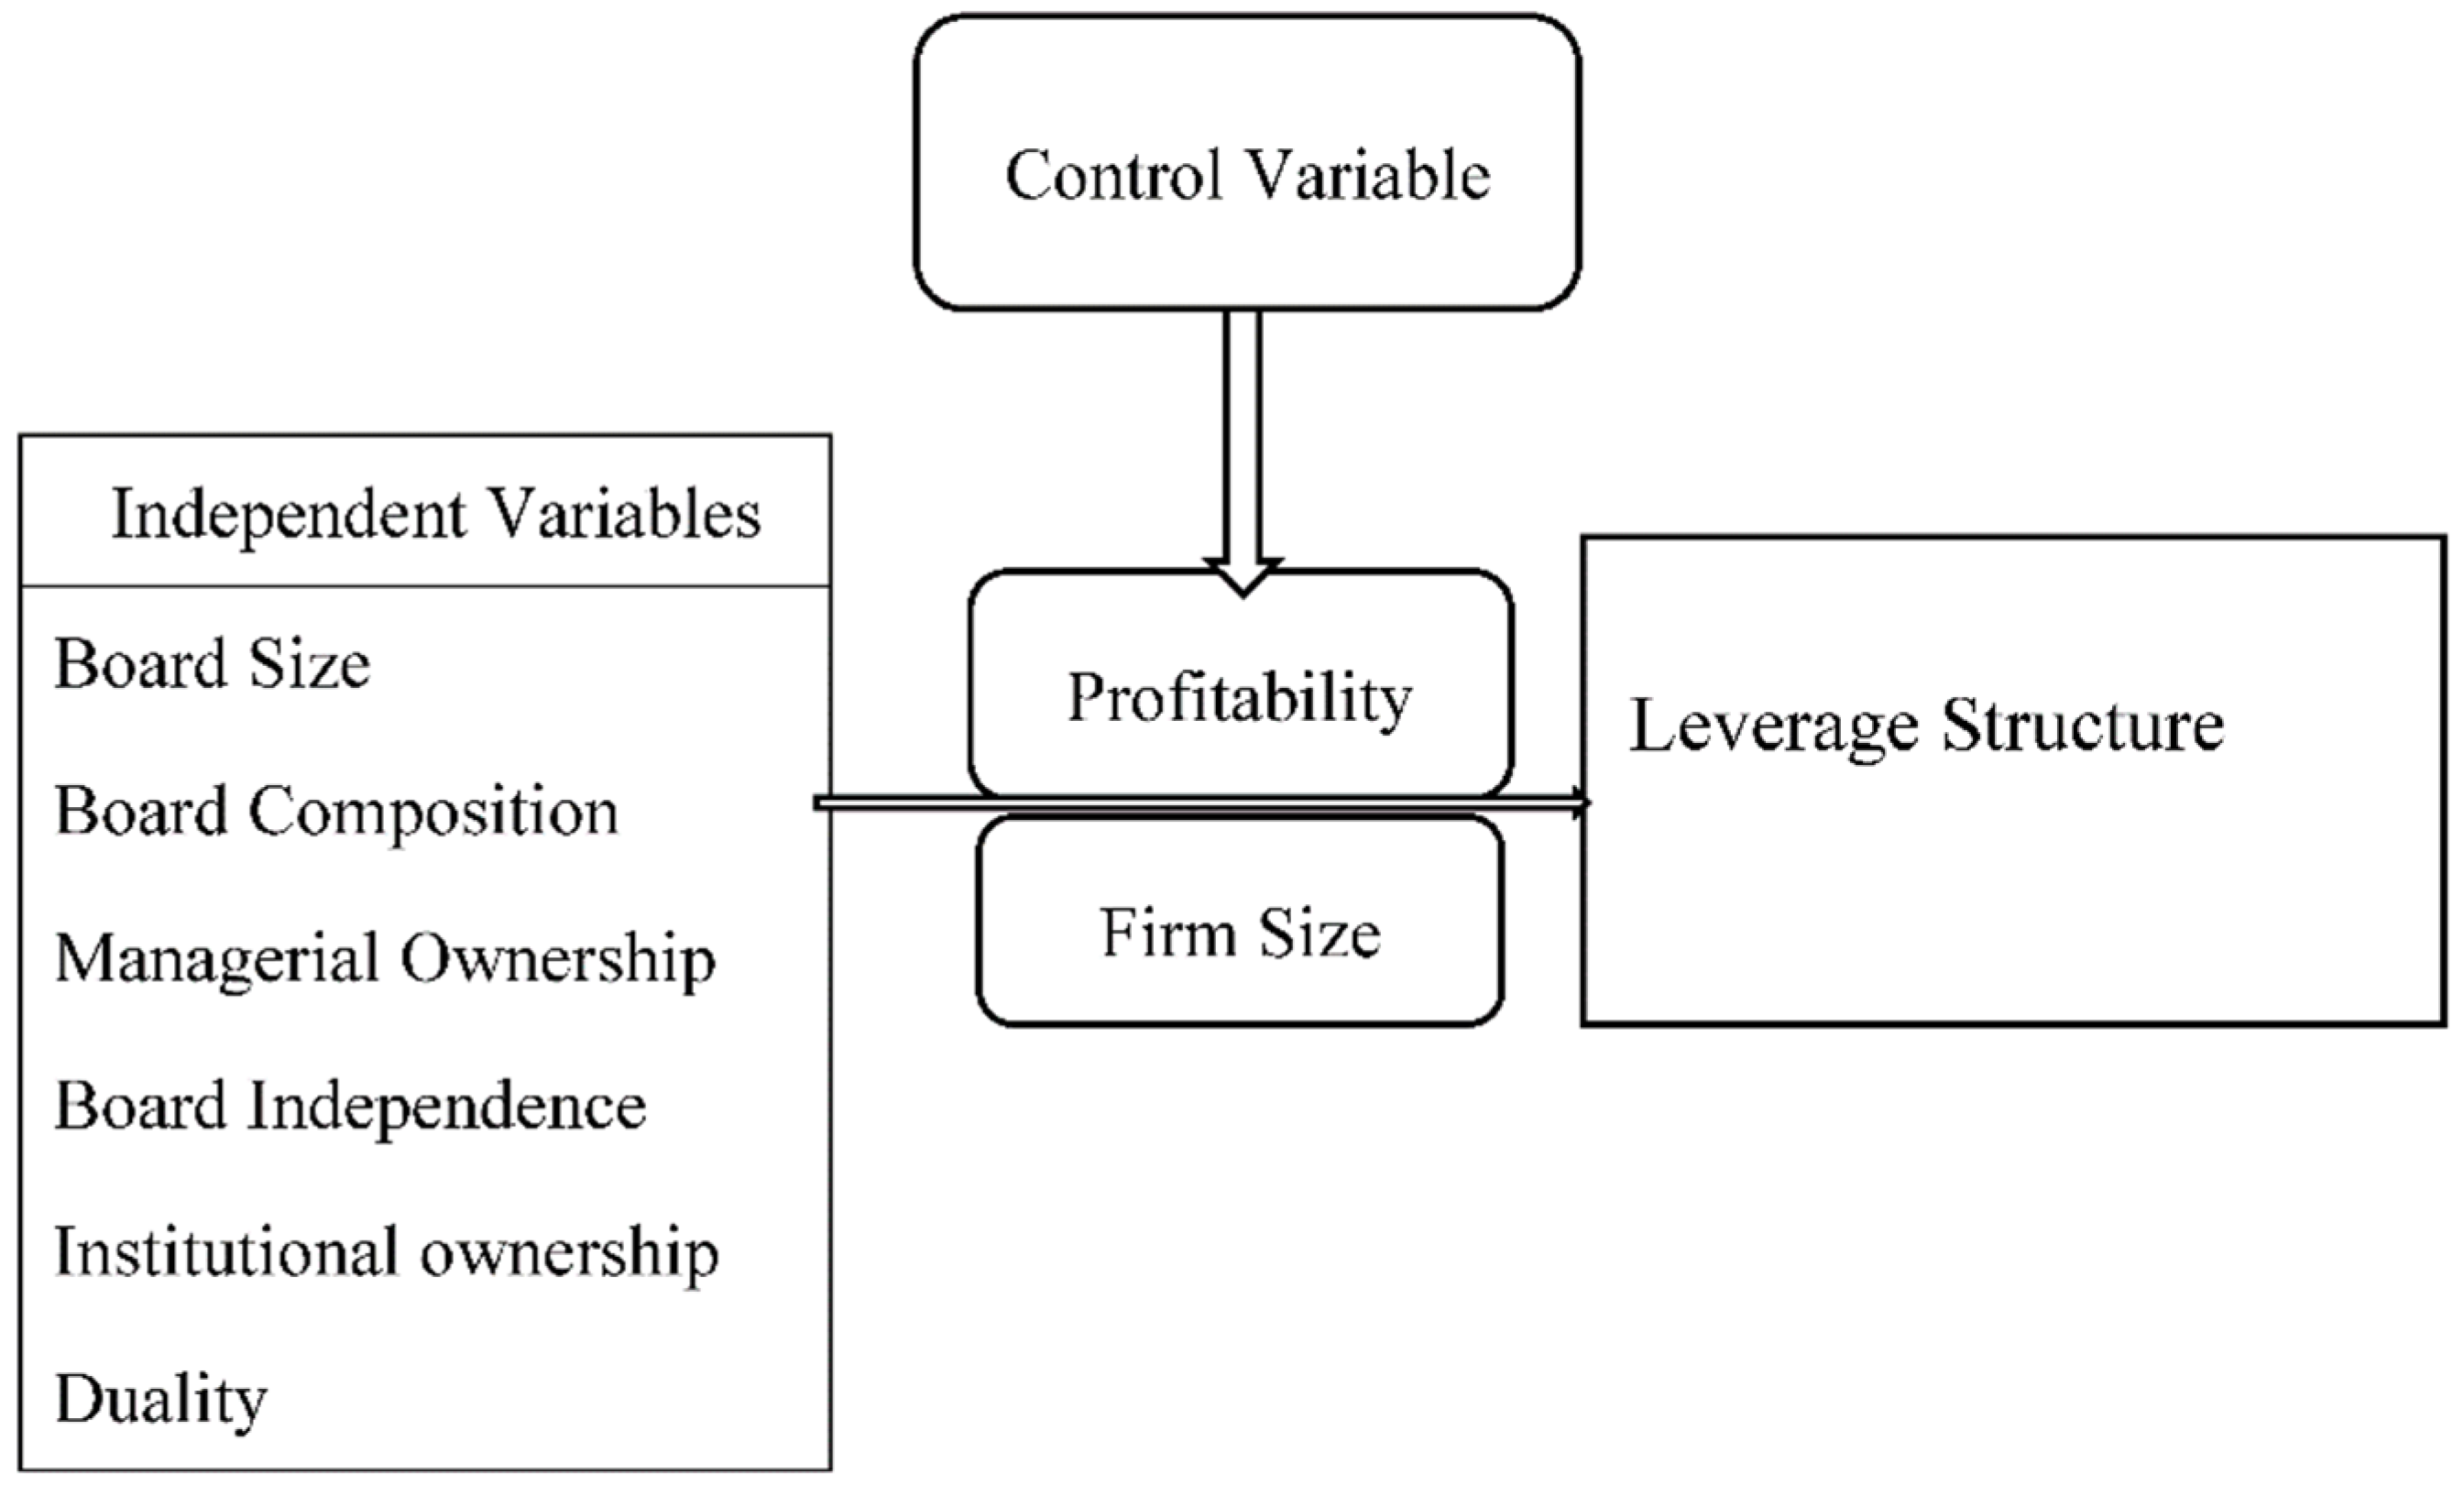 Control variables, their proxies and proposed relationship with leverage